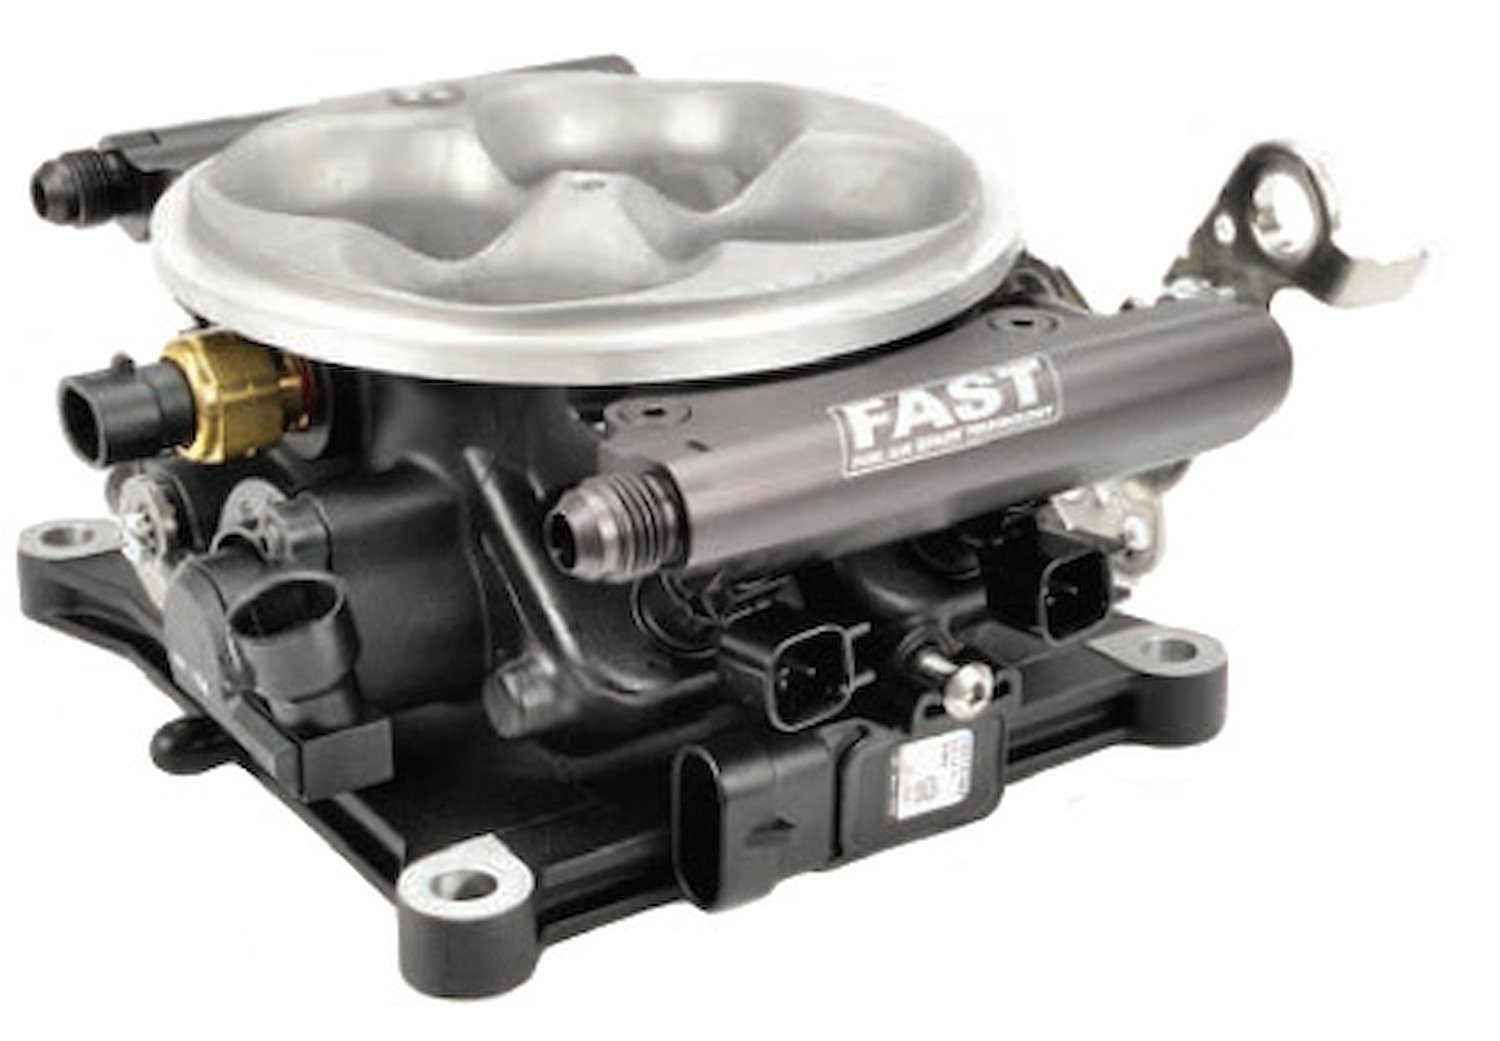 Cast High-Flow 4-Barrel Throttle Body 4150-Style Flange with Integrated Fuel Injectors